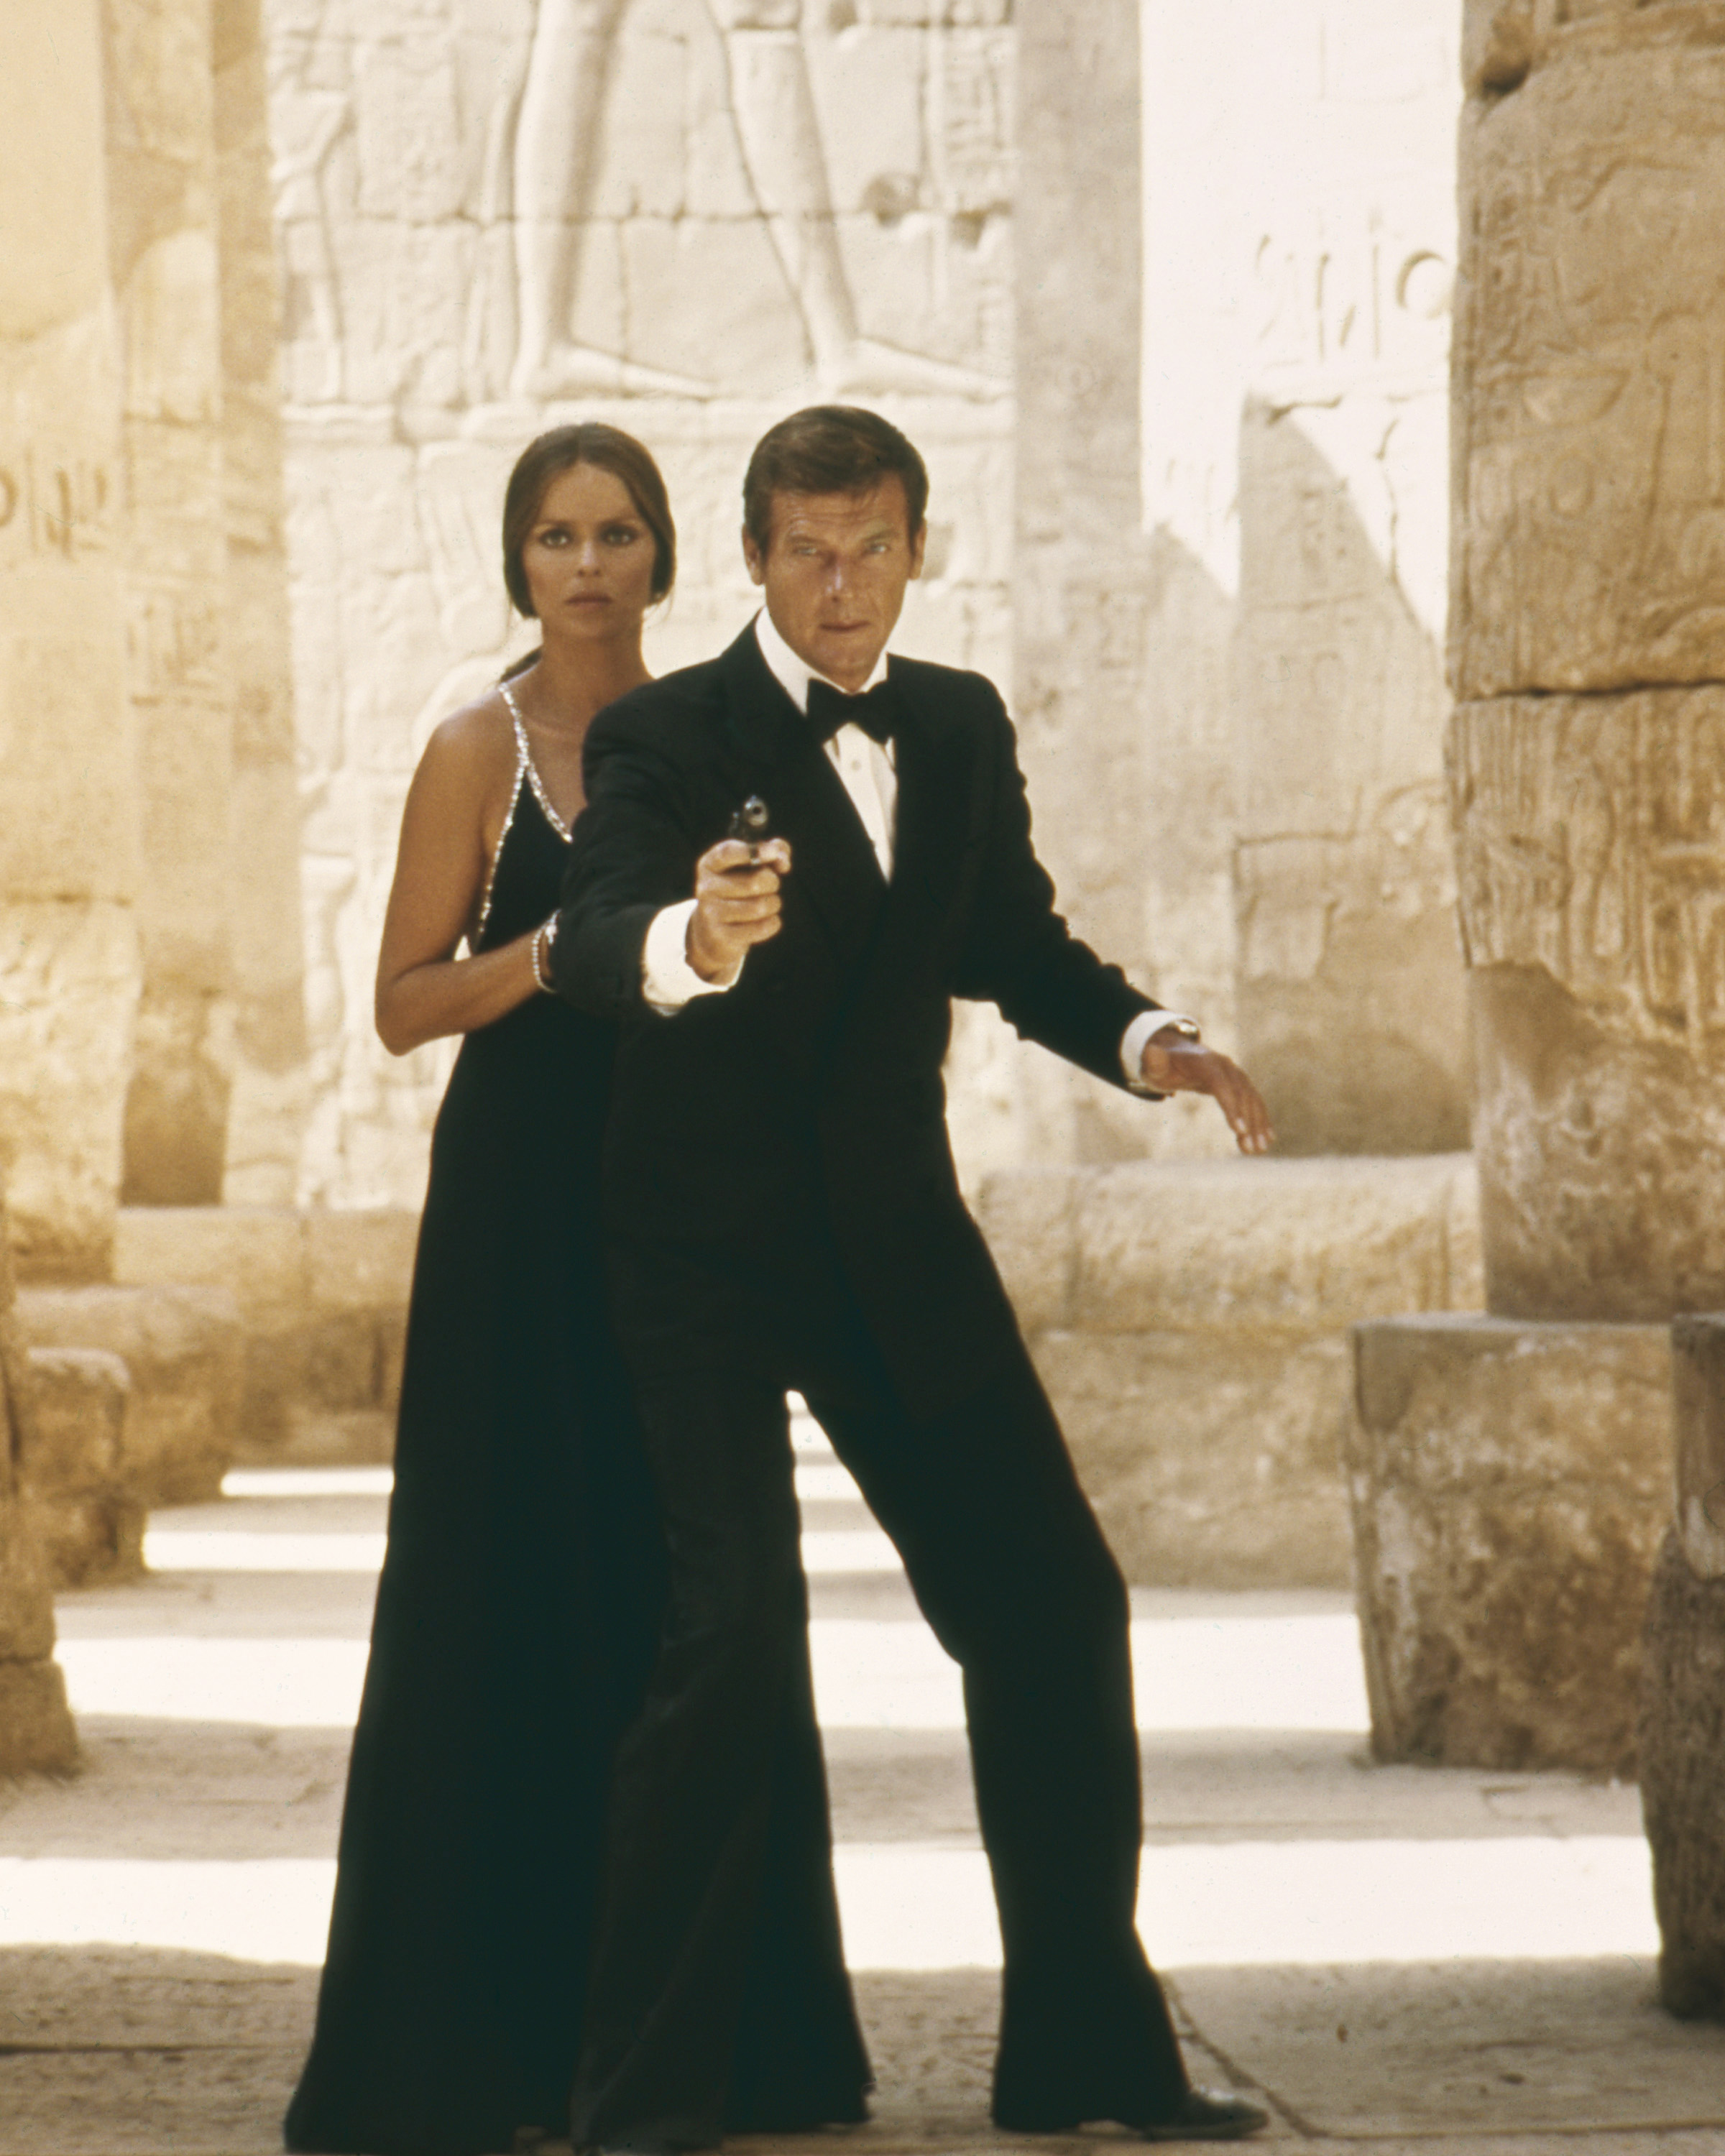 Barbara Bach and Roger Moore at the temple of Karnak in Egypt, in the film "The Spy Who Loved Me" in 1977. | Source: Getty Images